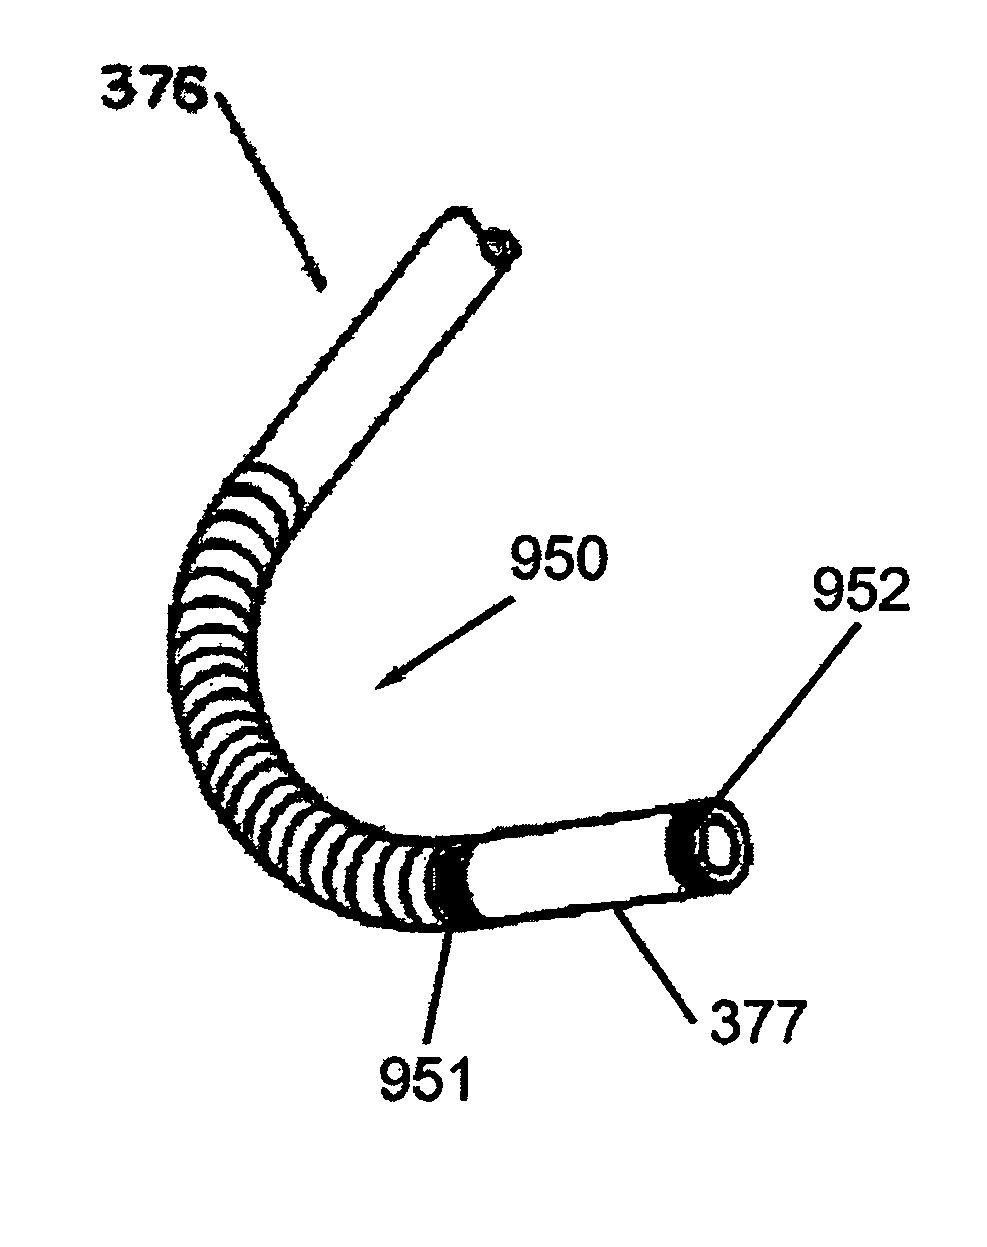 System and method for a magnetic catheter tip